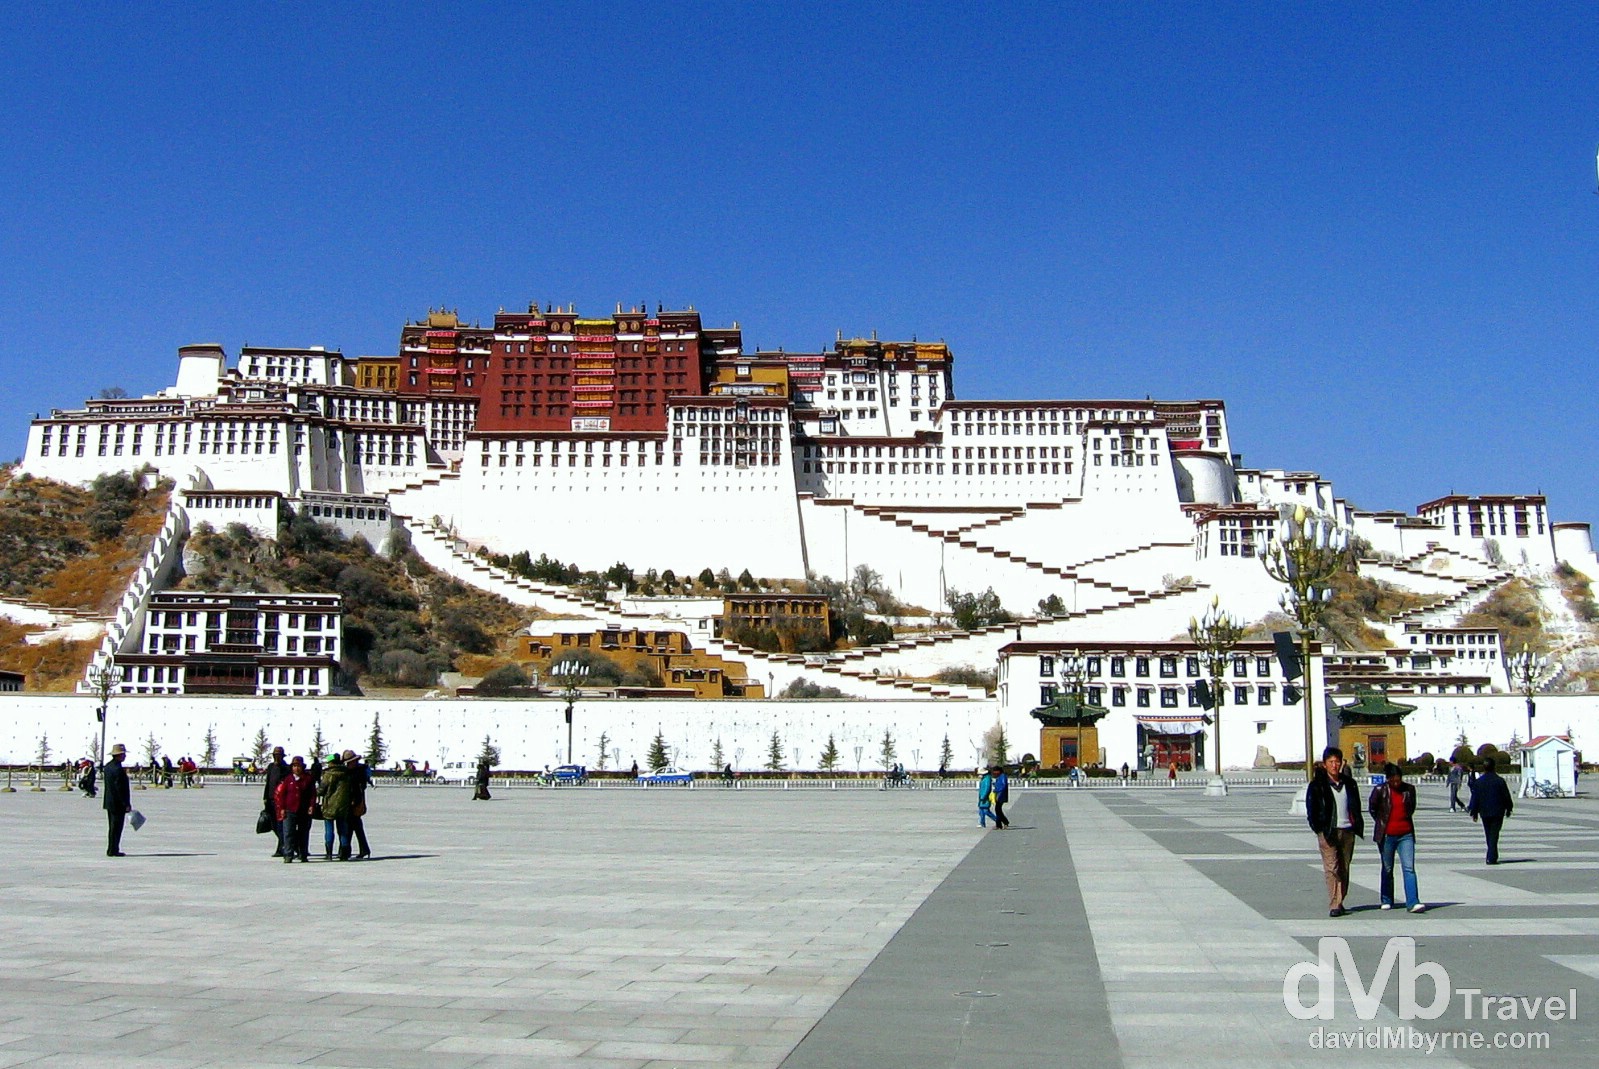 The Potala Palace as seen from People's Park, Lhasa, Tibet. February 25th, 2008.